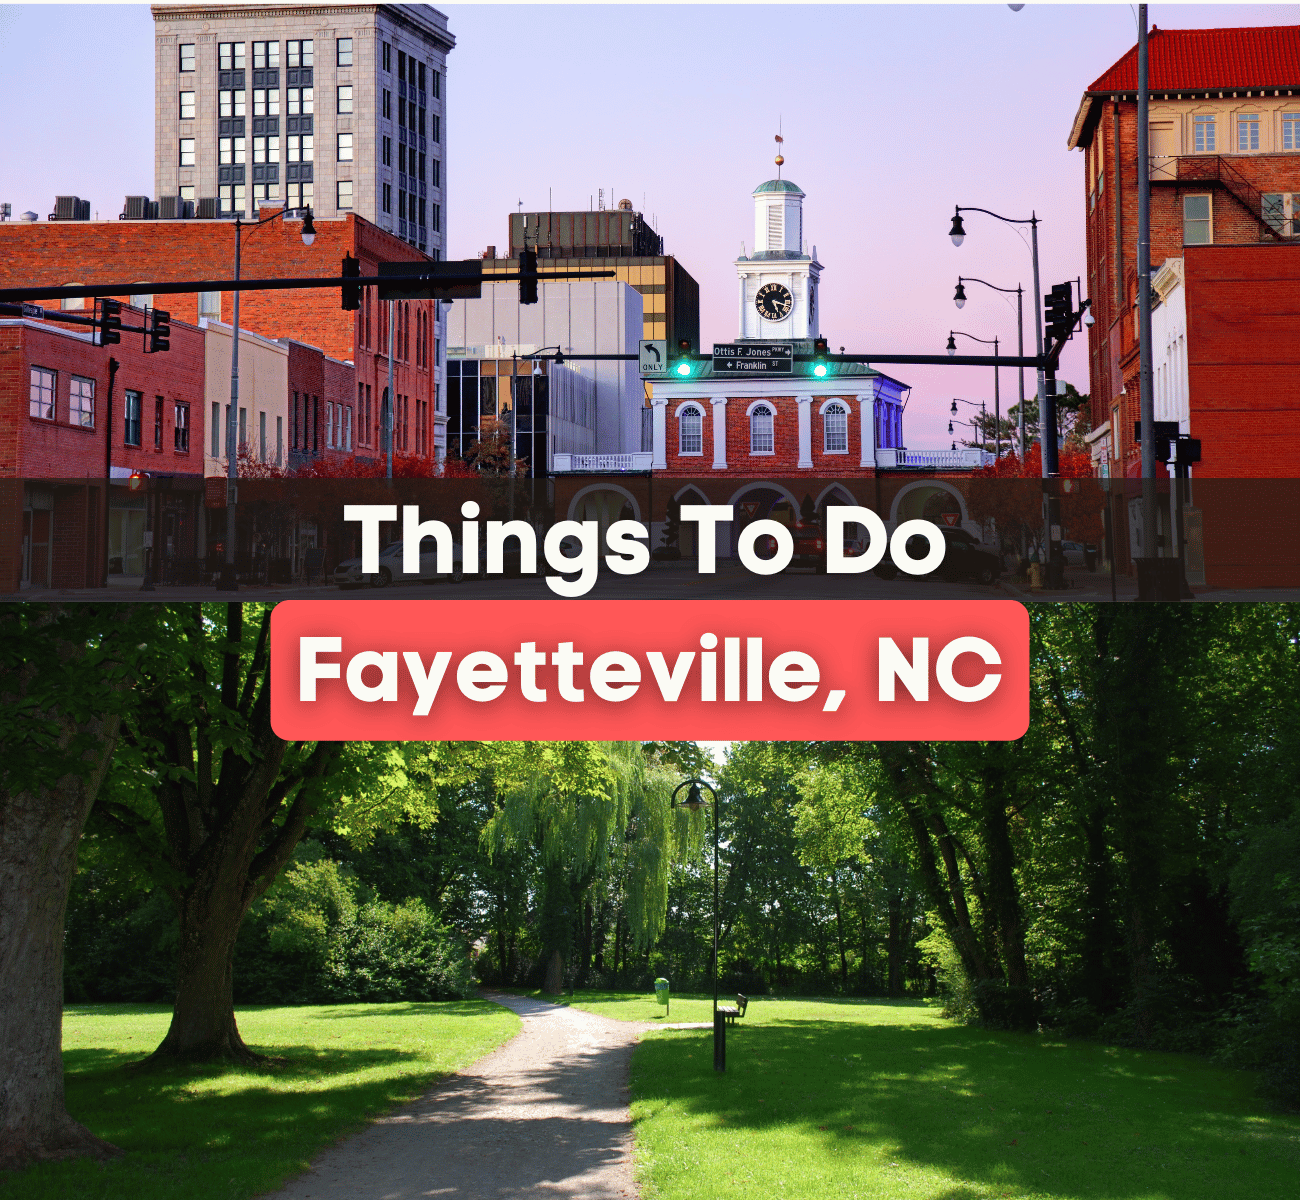 19 Best Things To Do in Fayetteville, NC